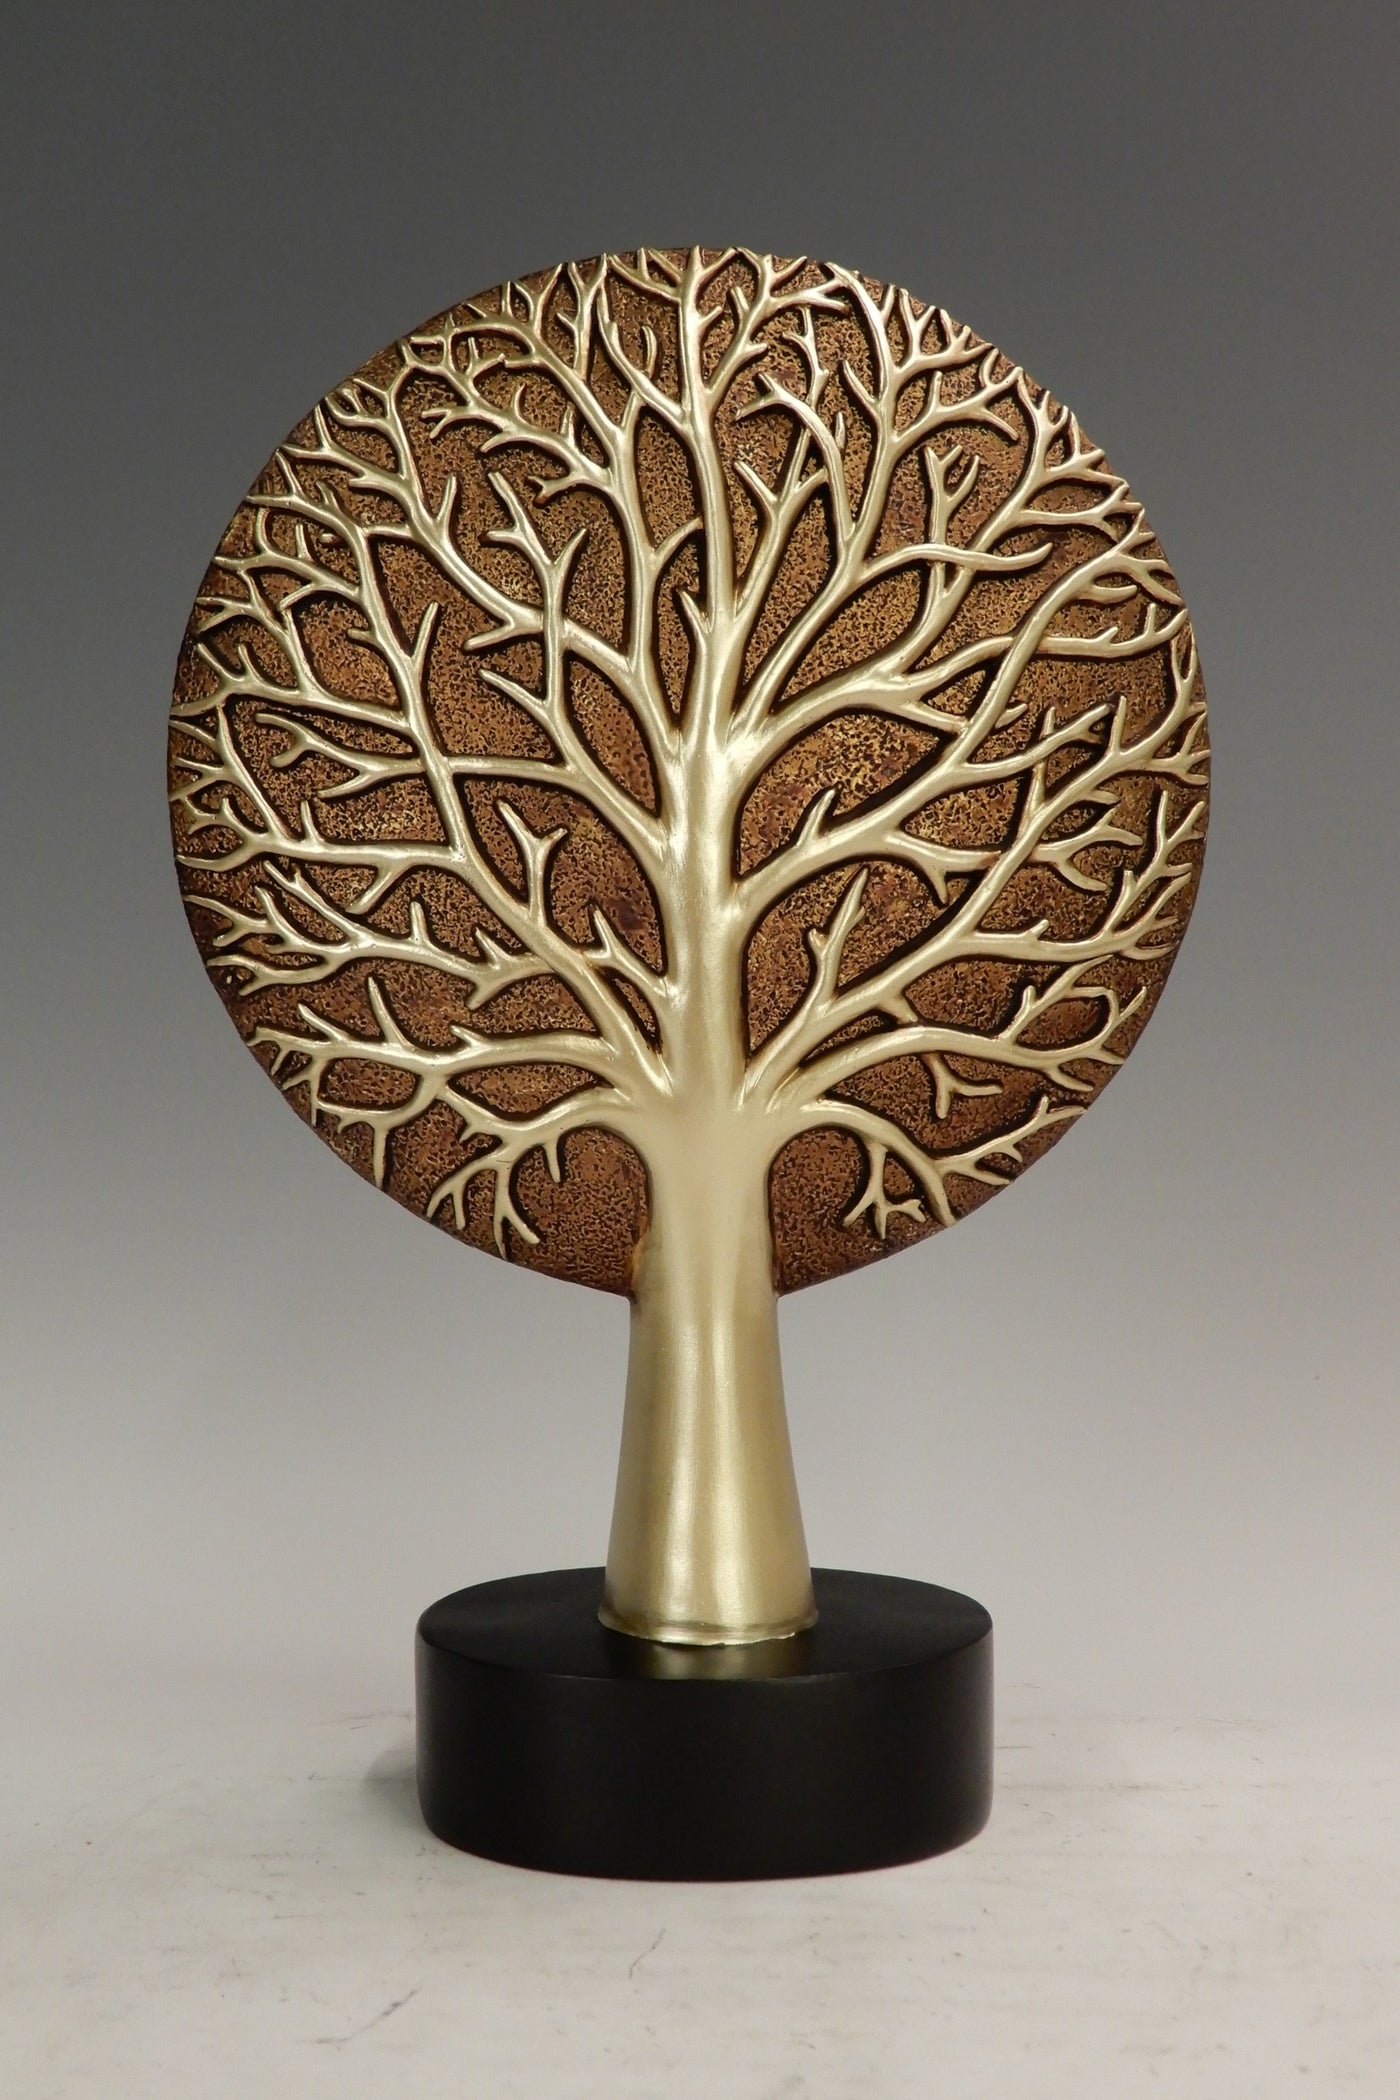 Resin Golden Tree for your home or office decor